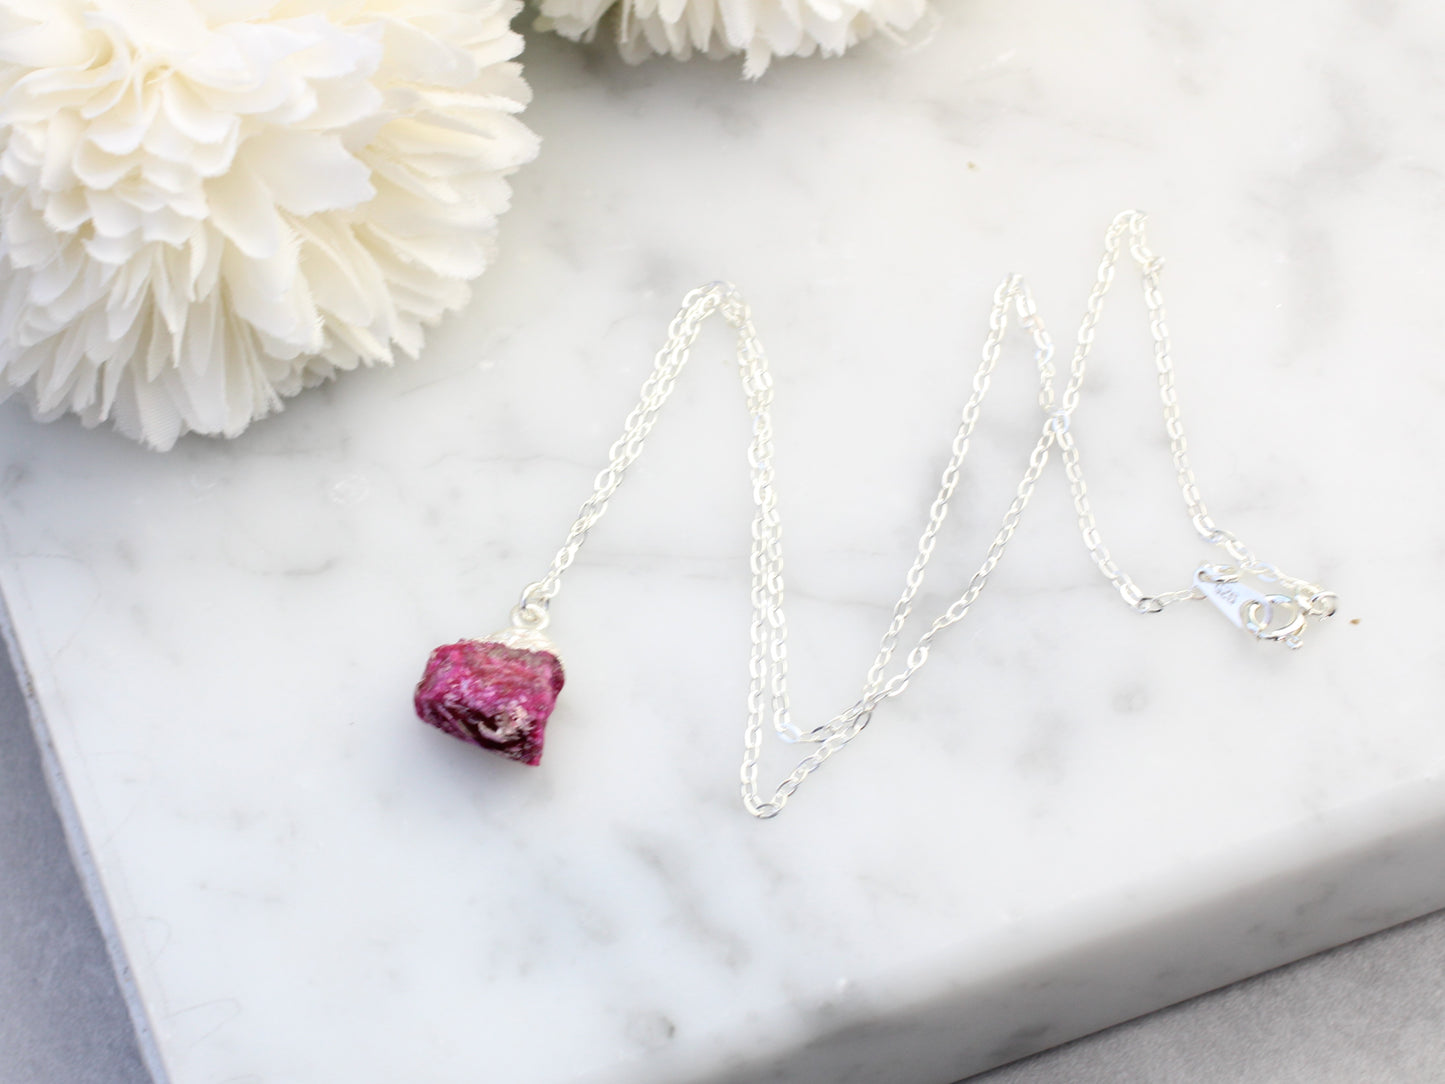 Raw ruby necklace in silver. July birthstone necklace.